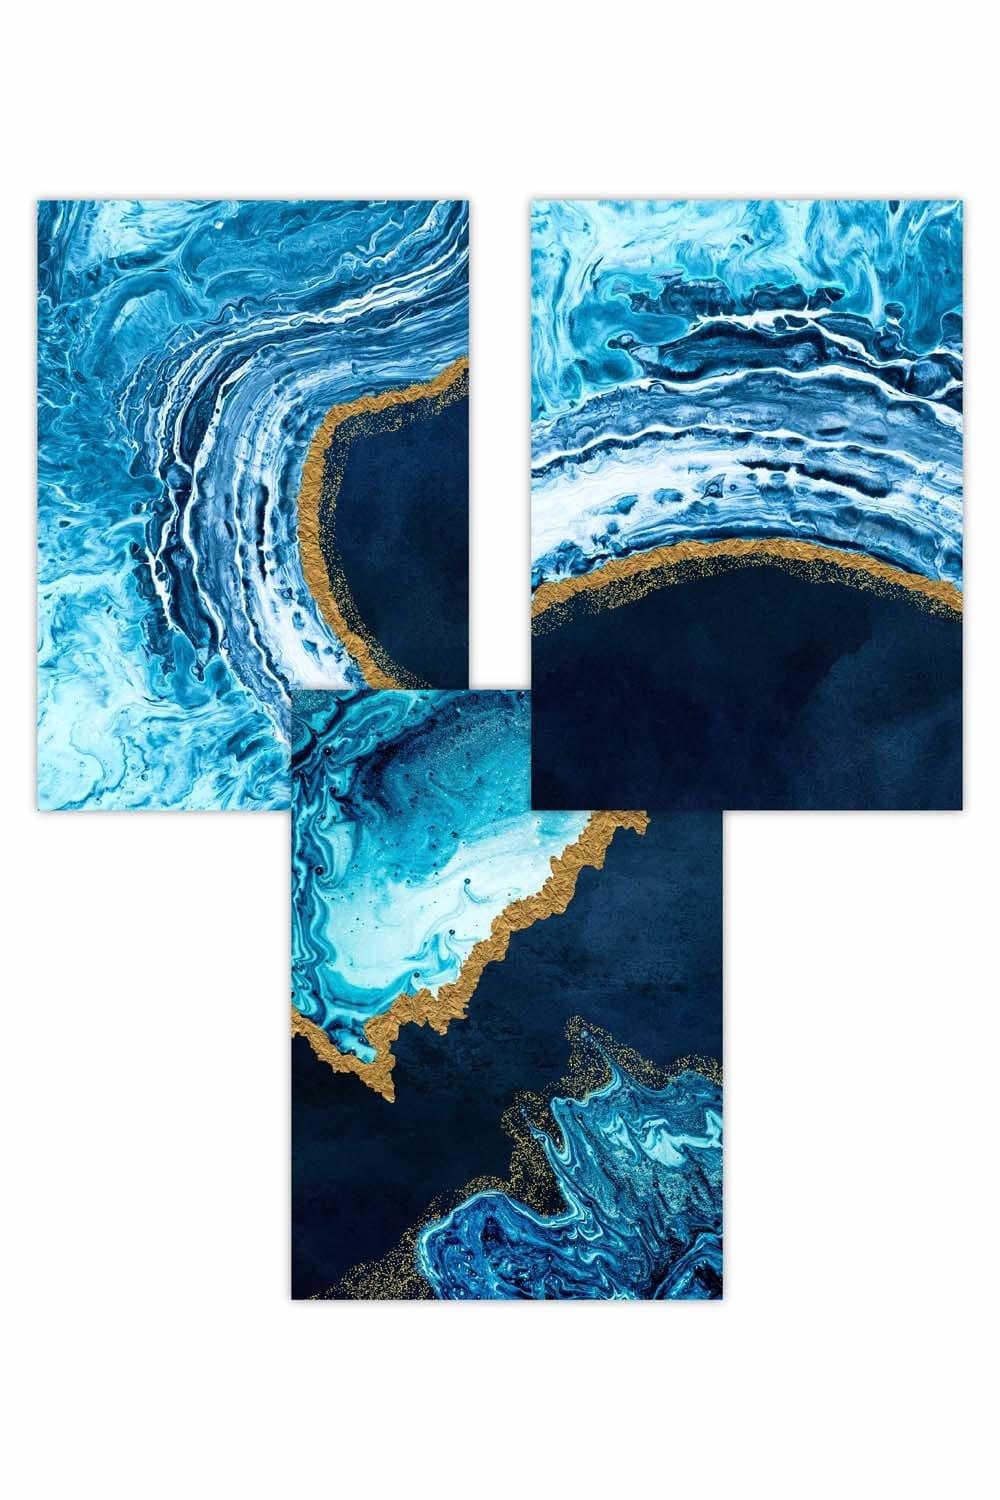 Set of 3 Abstract Navy, Blue and Gold Oceans Art Posters